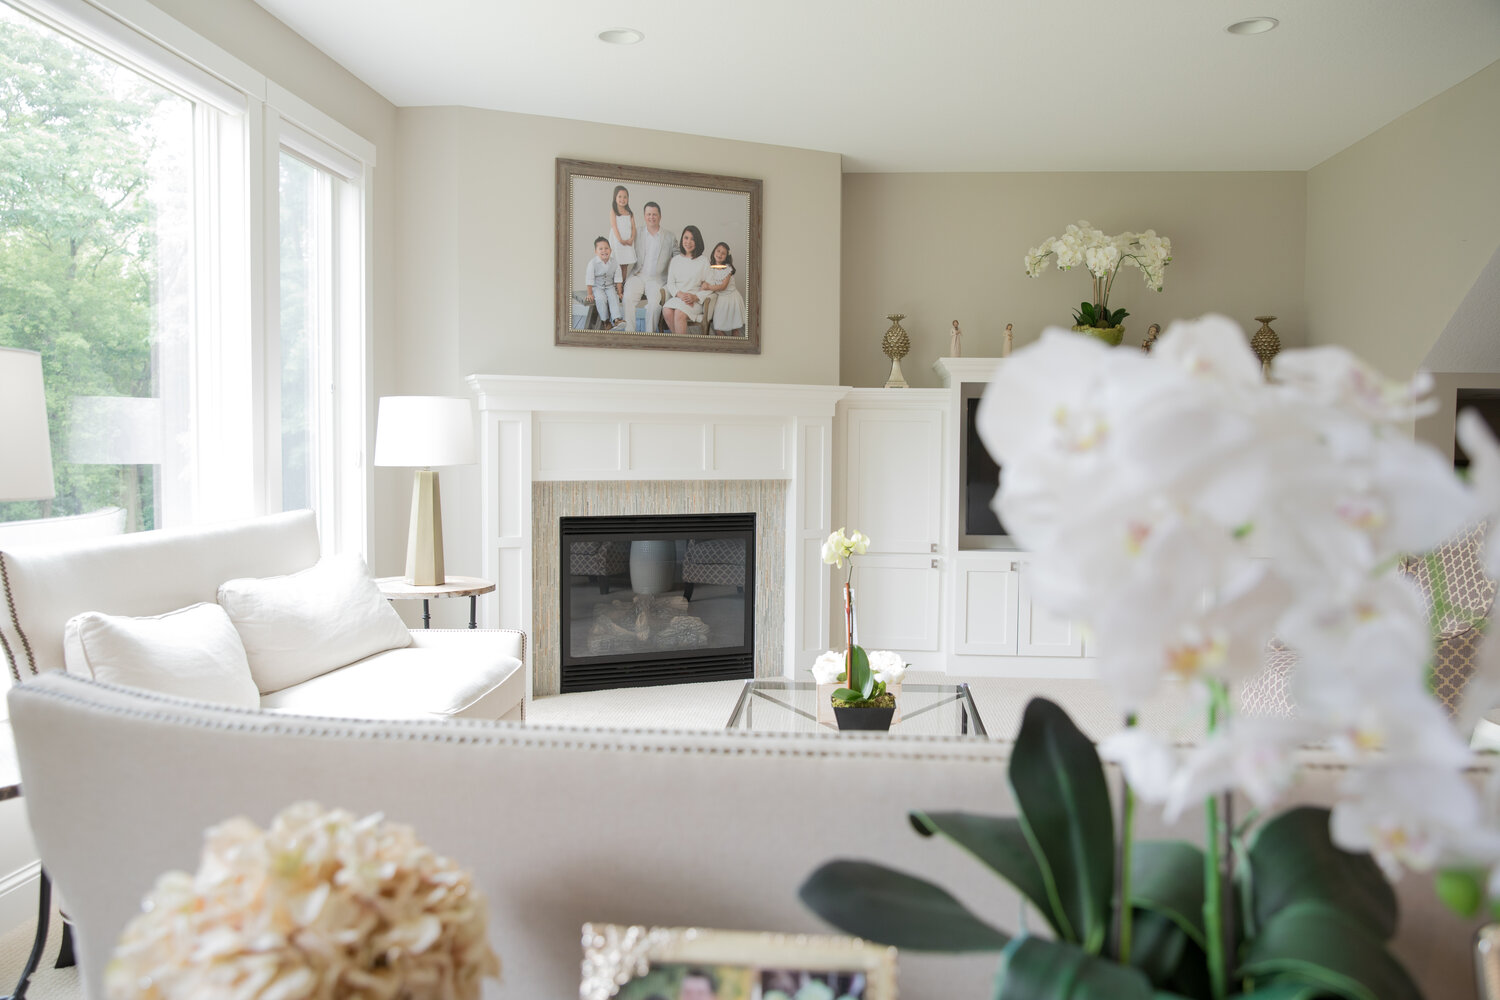 image of photo above fireplace in beautiful home.